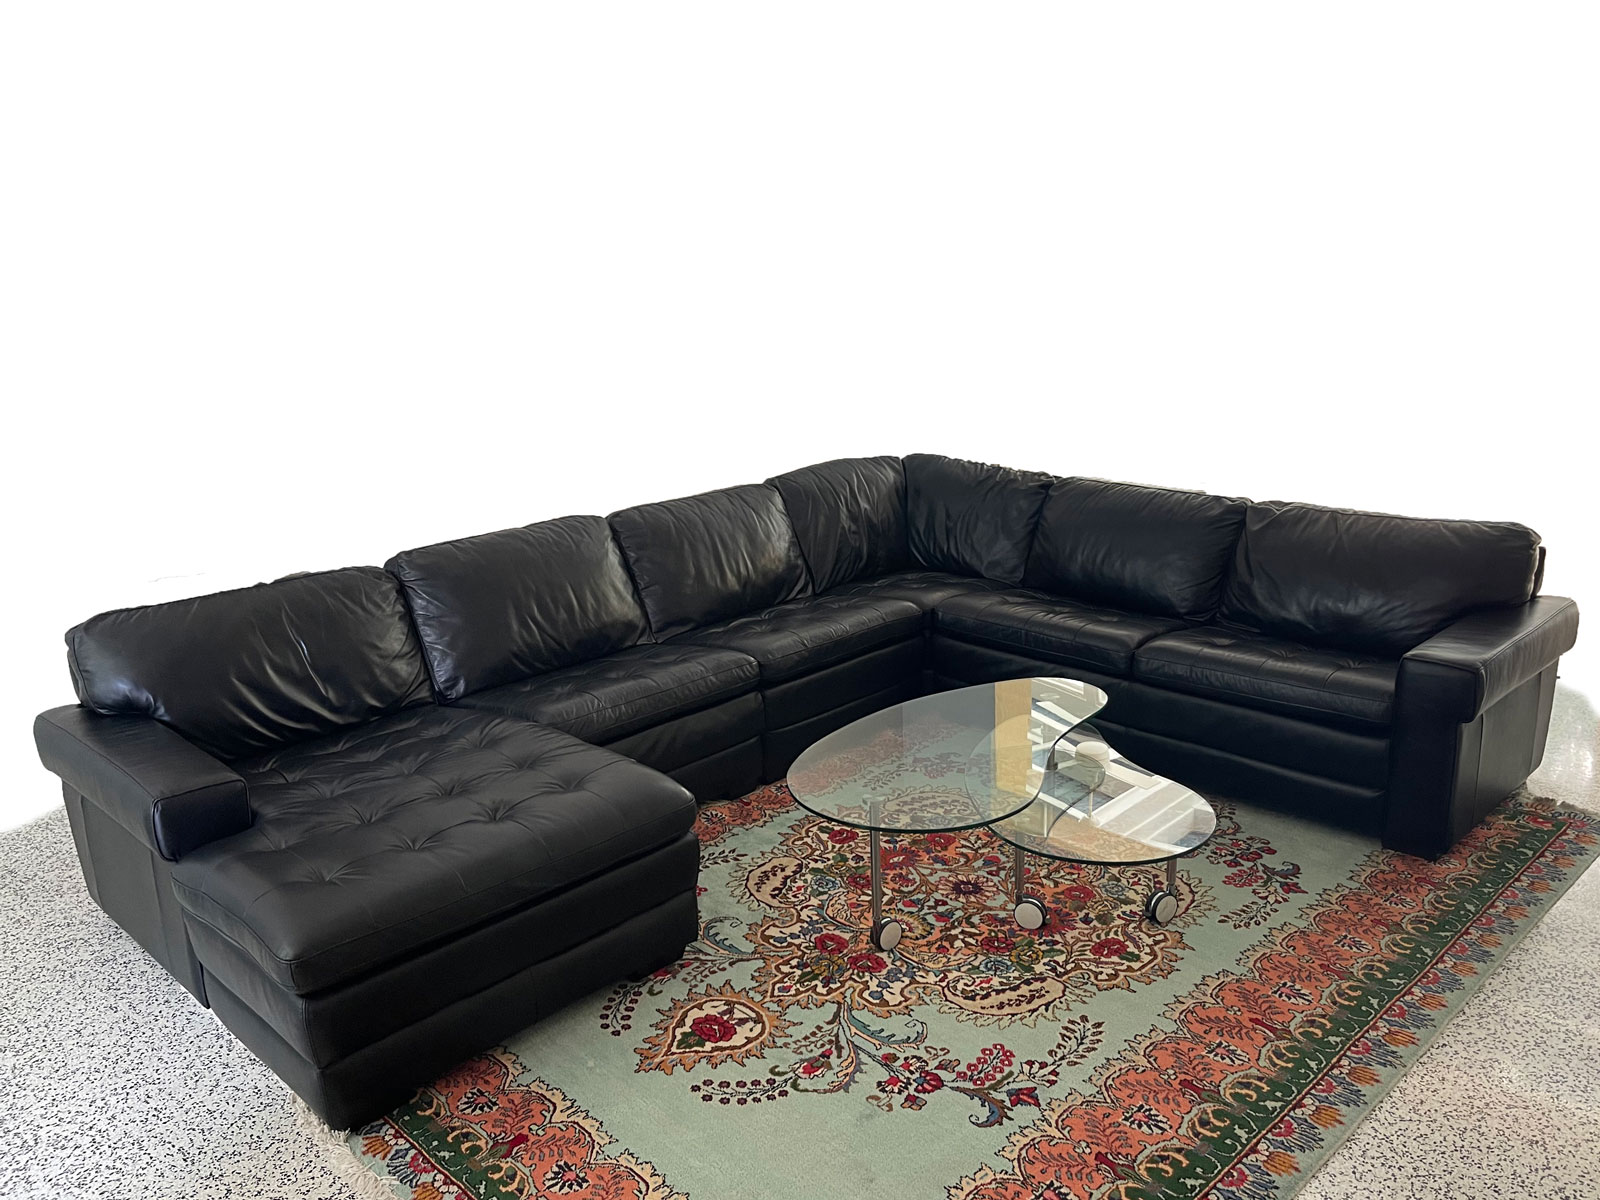 BLACK LEATHER SECTIONAL COUCH: